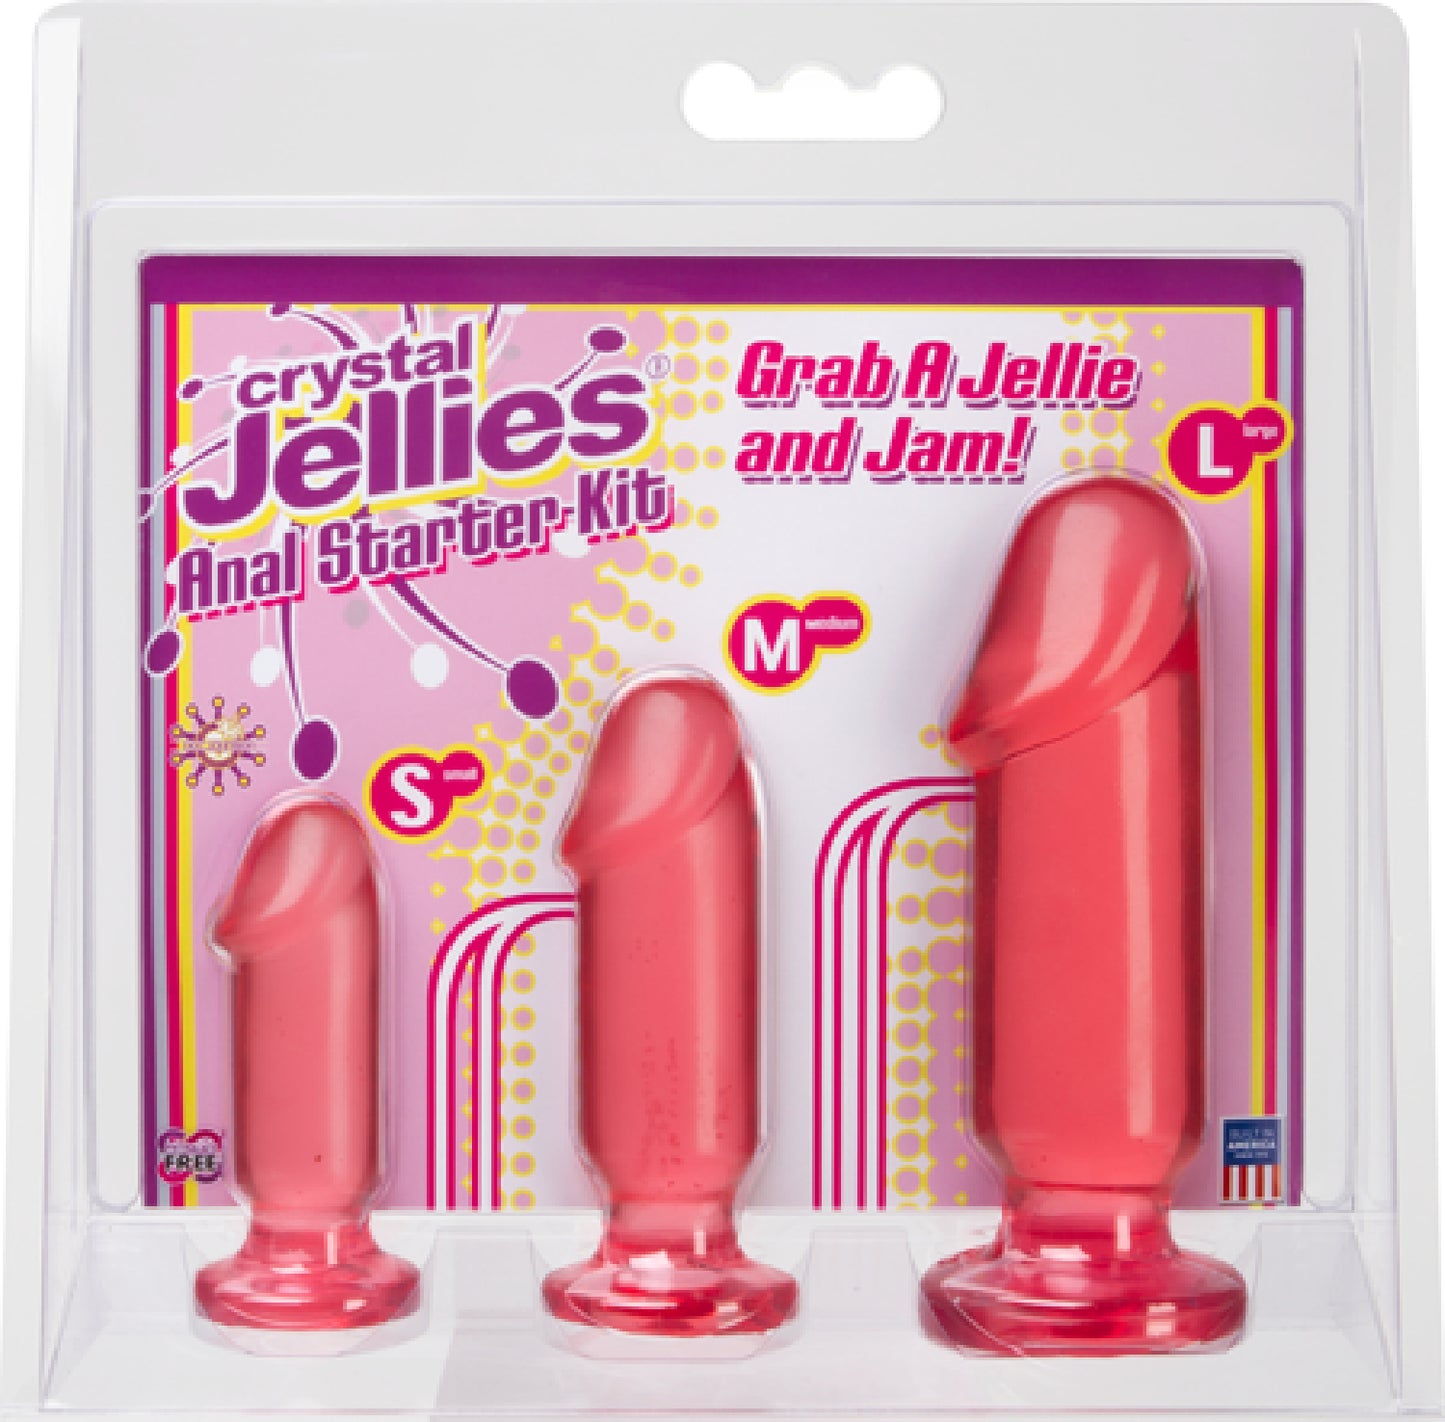 Doc Johnson's Crystal Jellies - Anal Starter Kit - One Stop Adult Shop